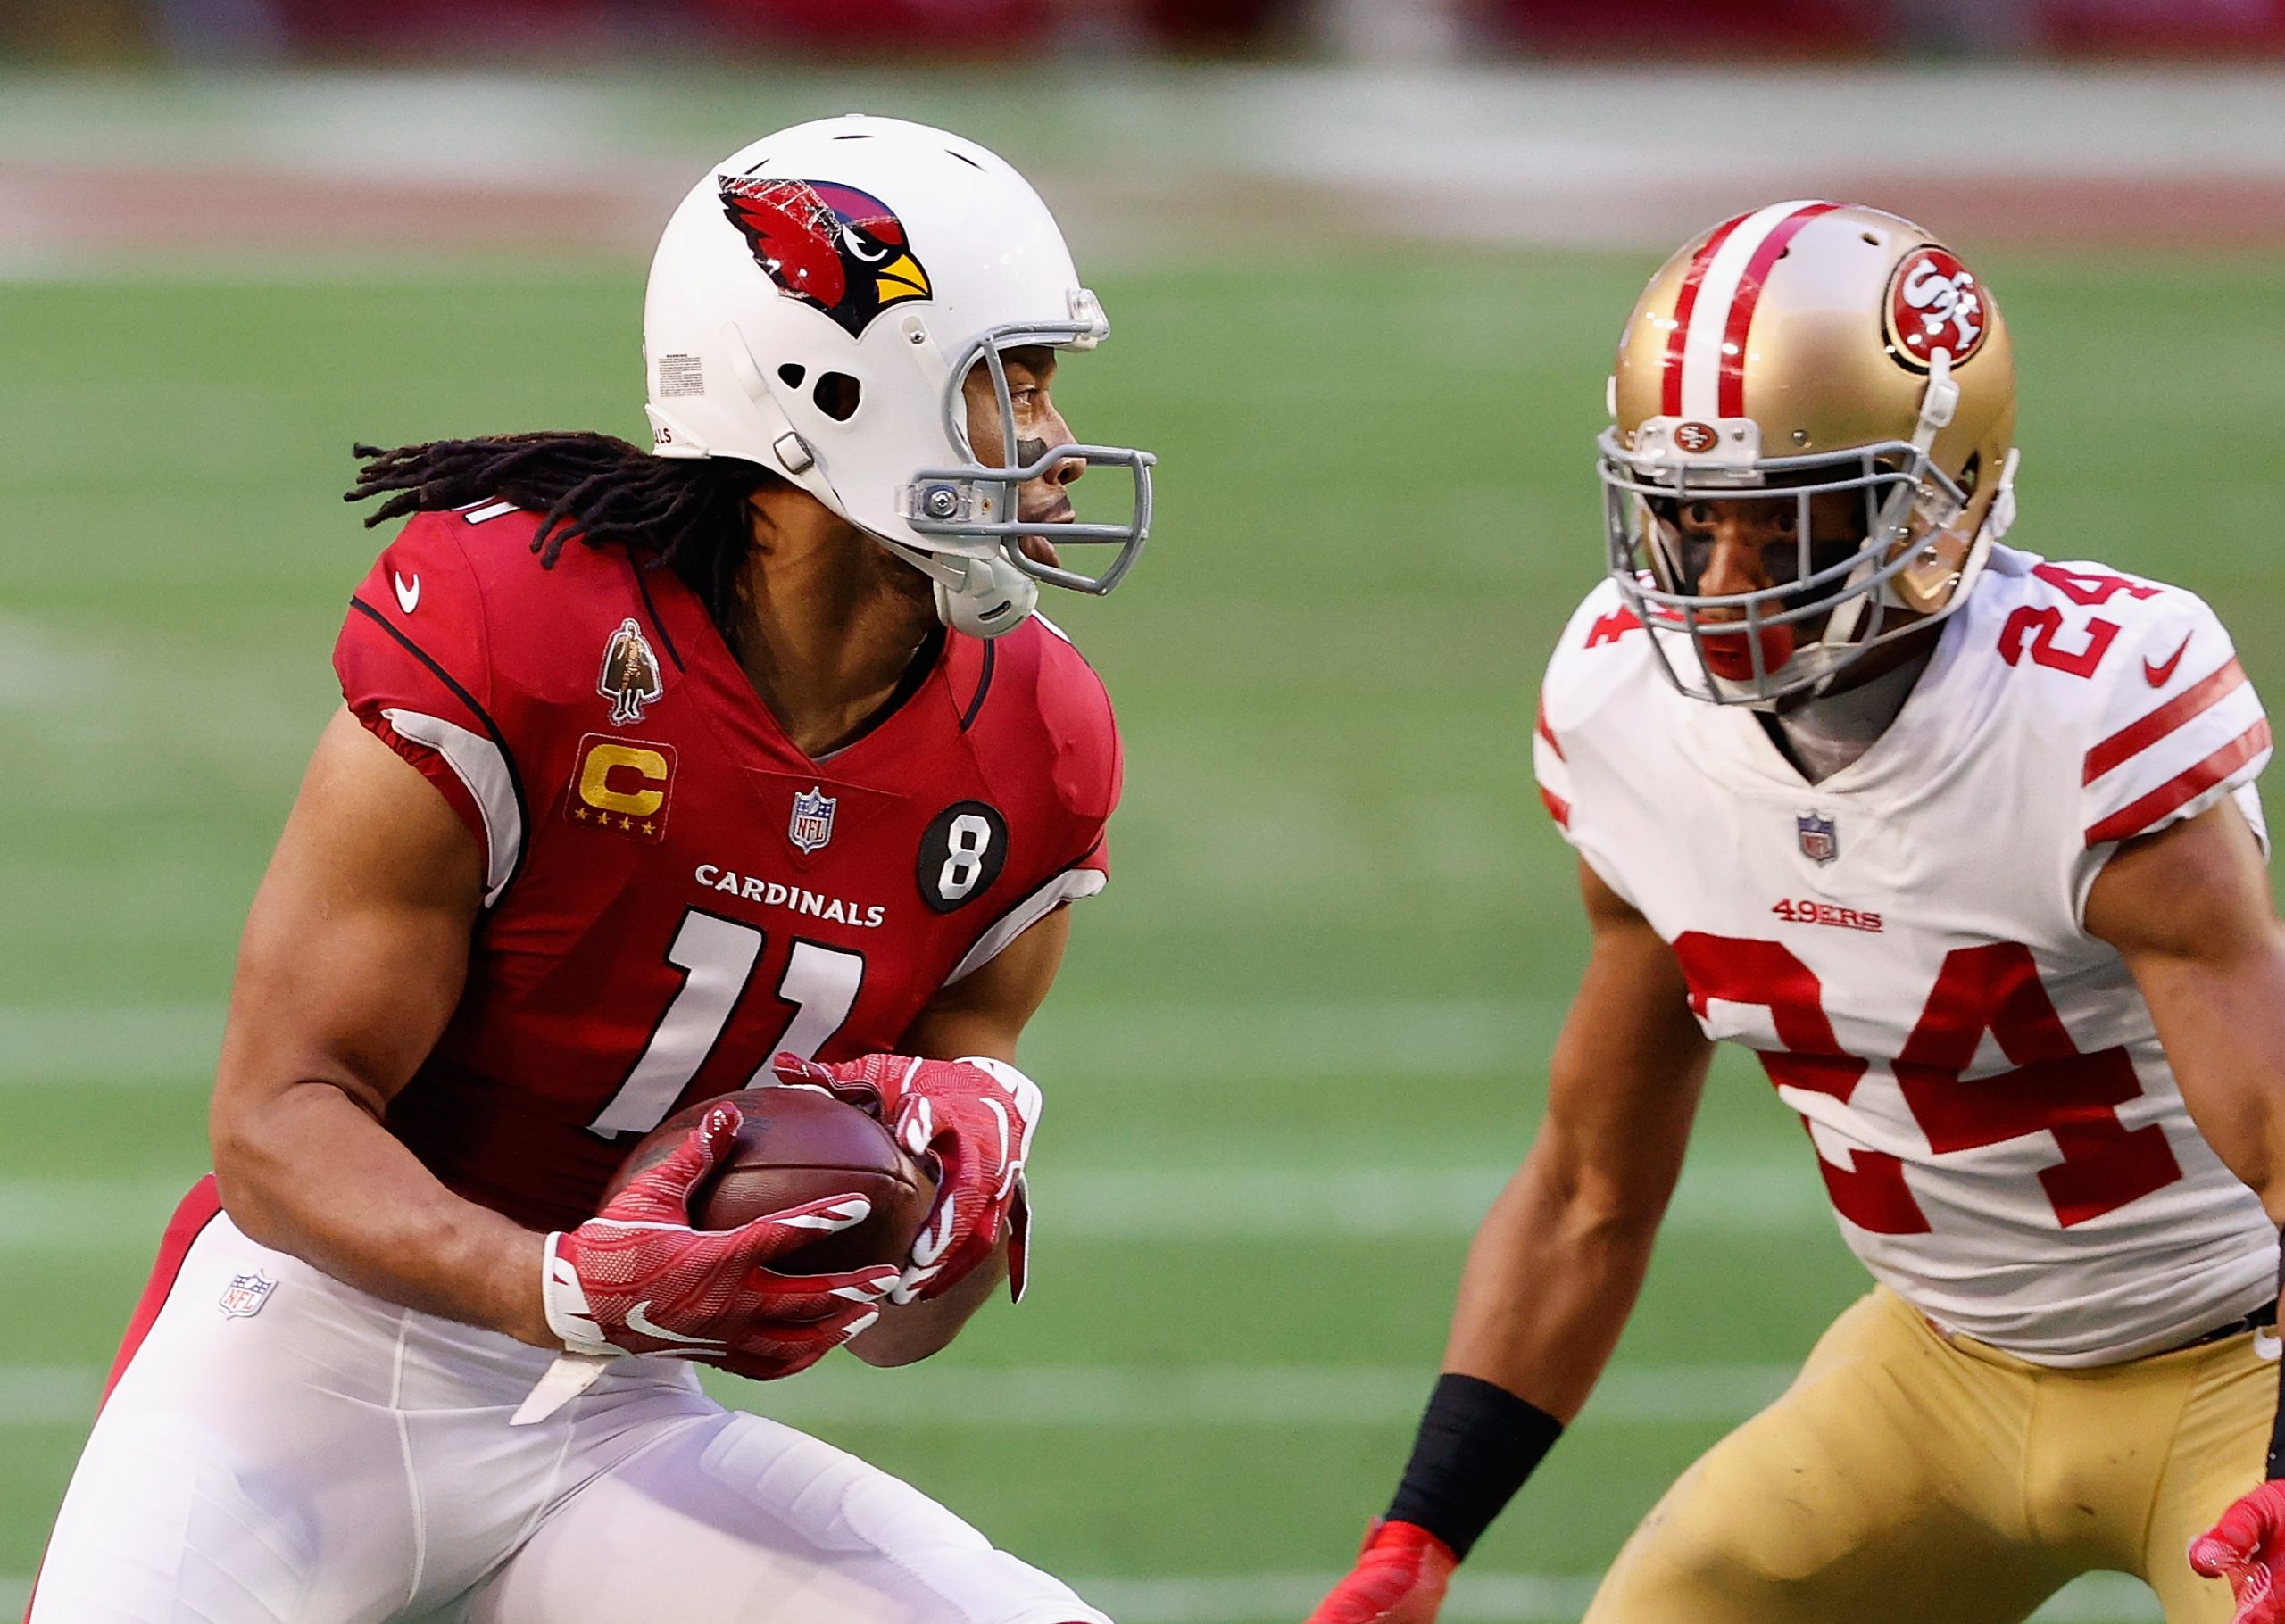 Wide receiver Larry Fitzgerald of the Arizona Cardinals makes a reception against the San Francisco 49ers.